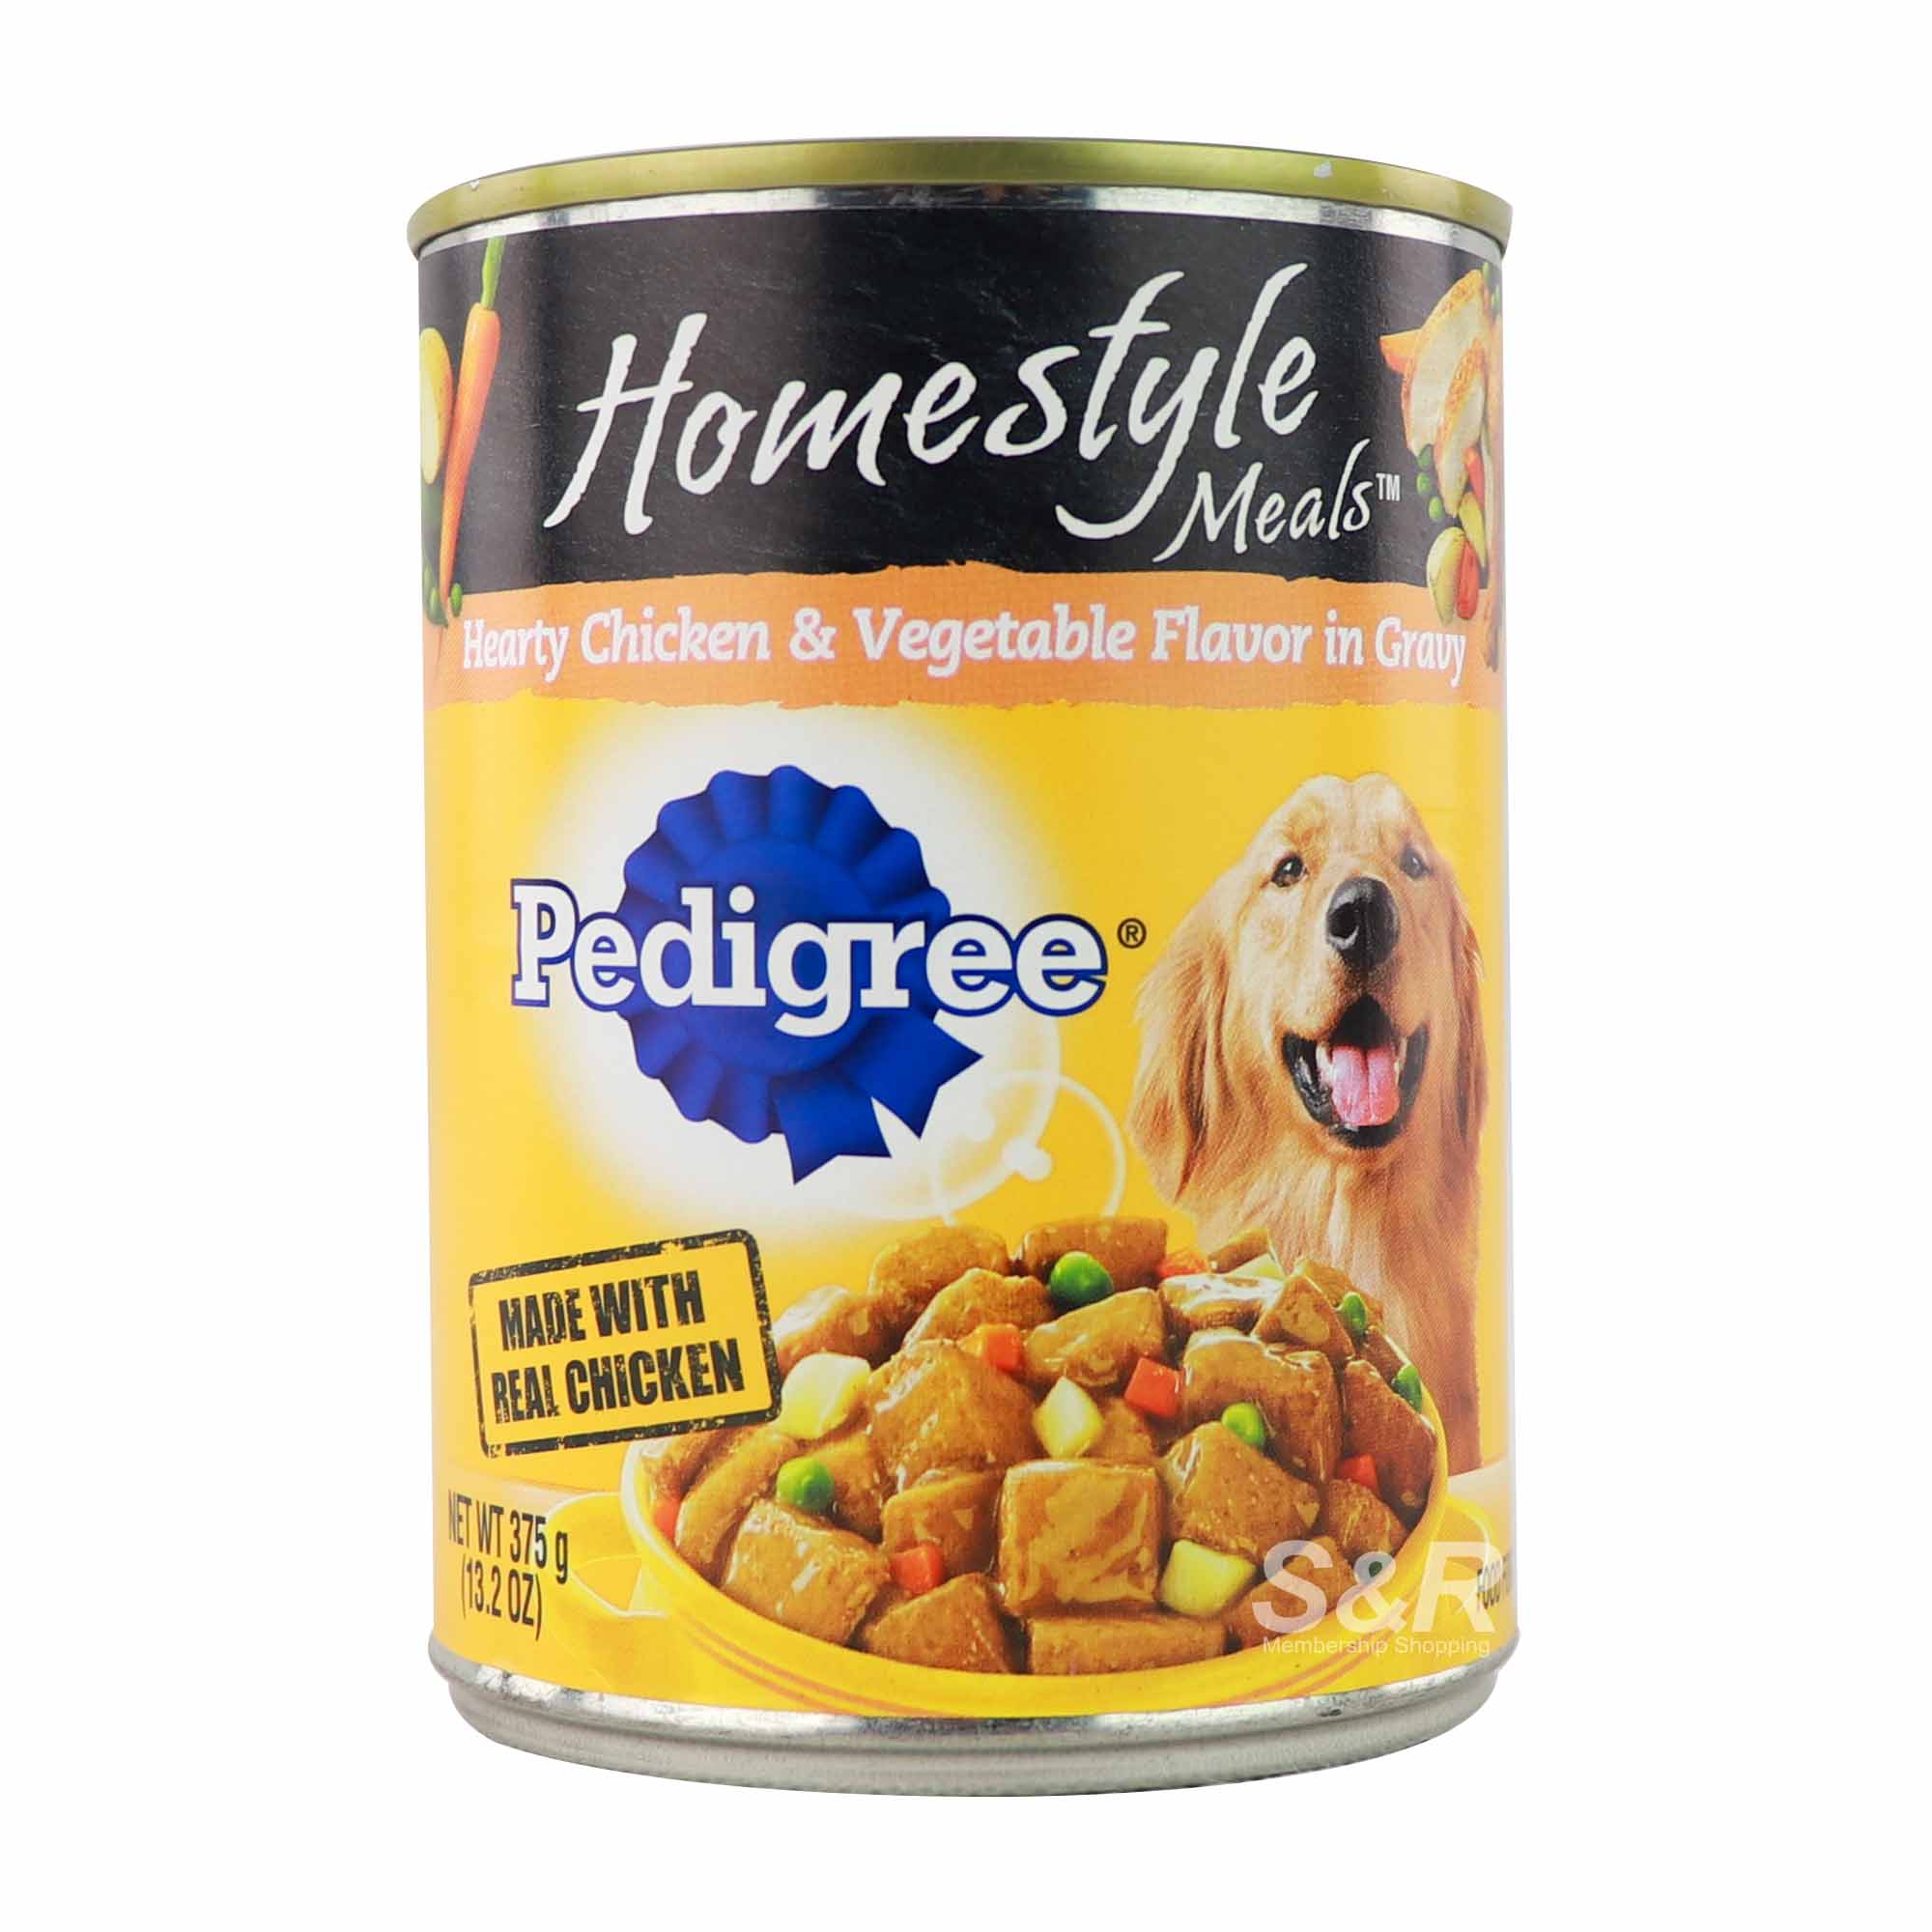 Pedigree Homestyle Meals Hearty Chicken and Vegetable Flavor in Gravy Adult Wet Dog Food 375g